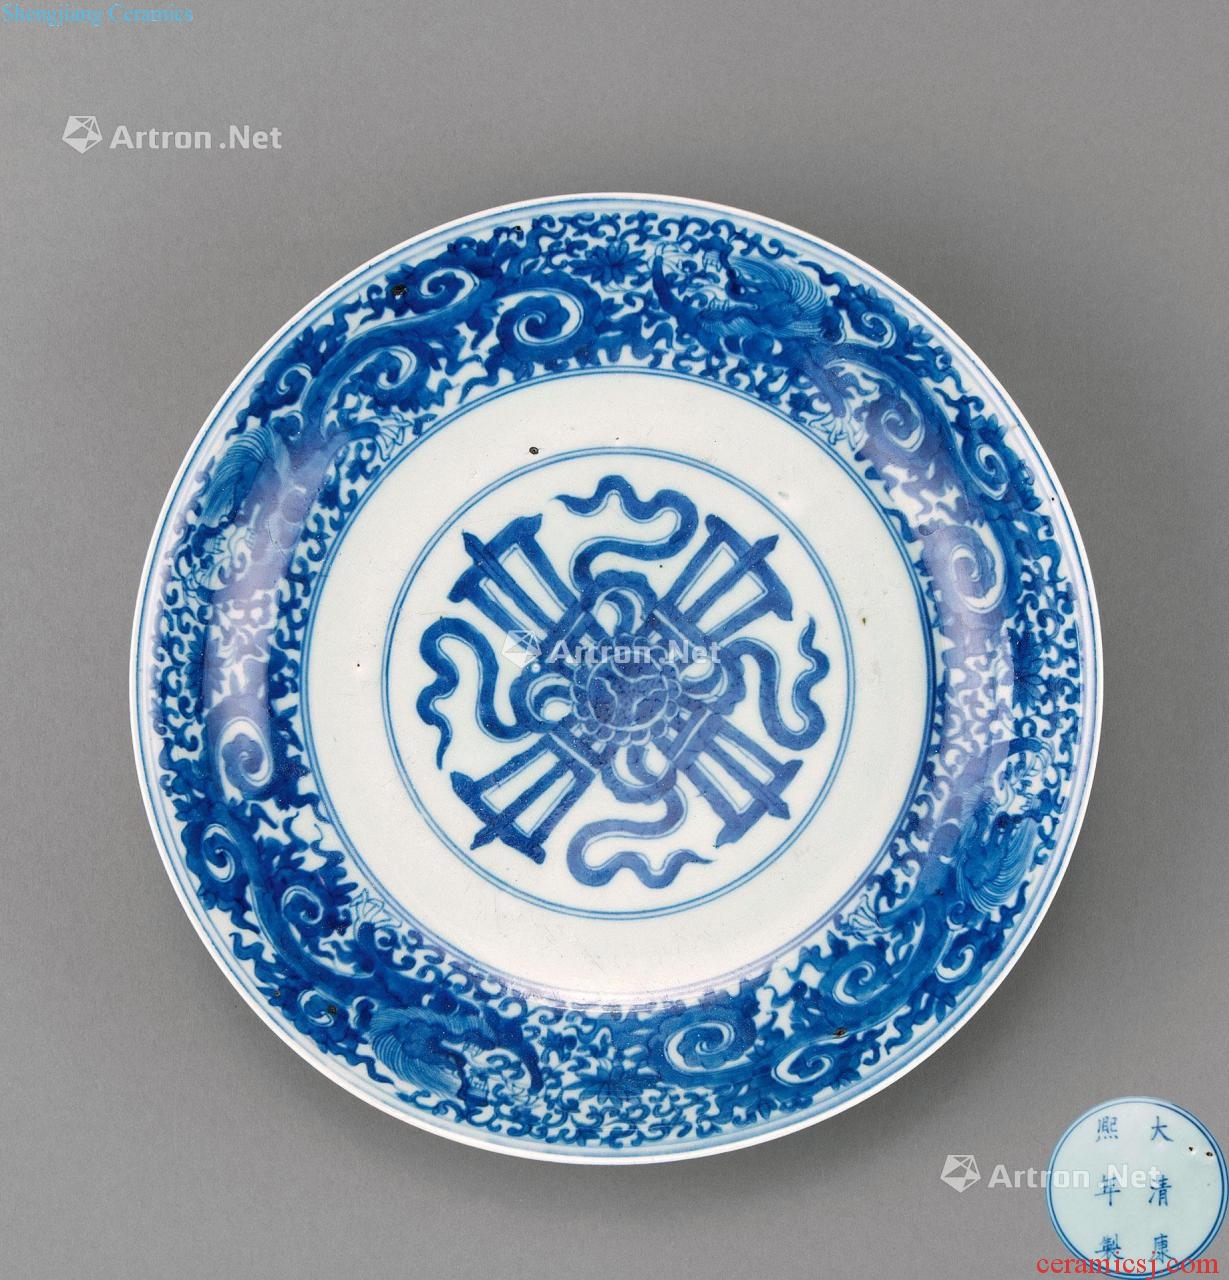 In the qing dynasty Blue vajra dragon pattern plate